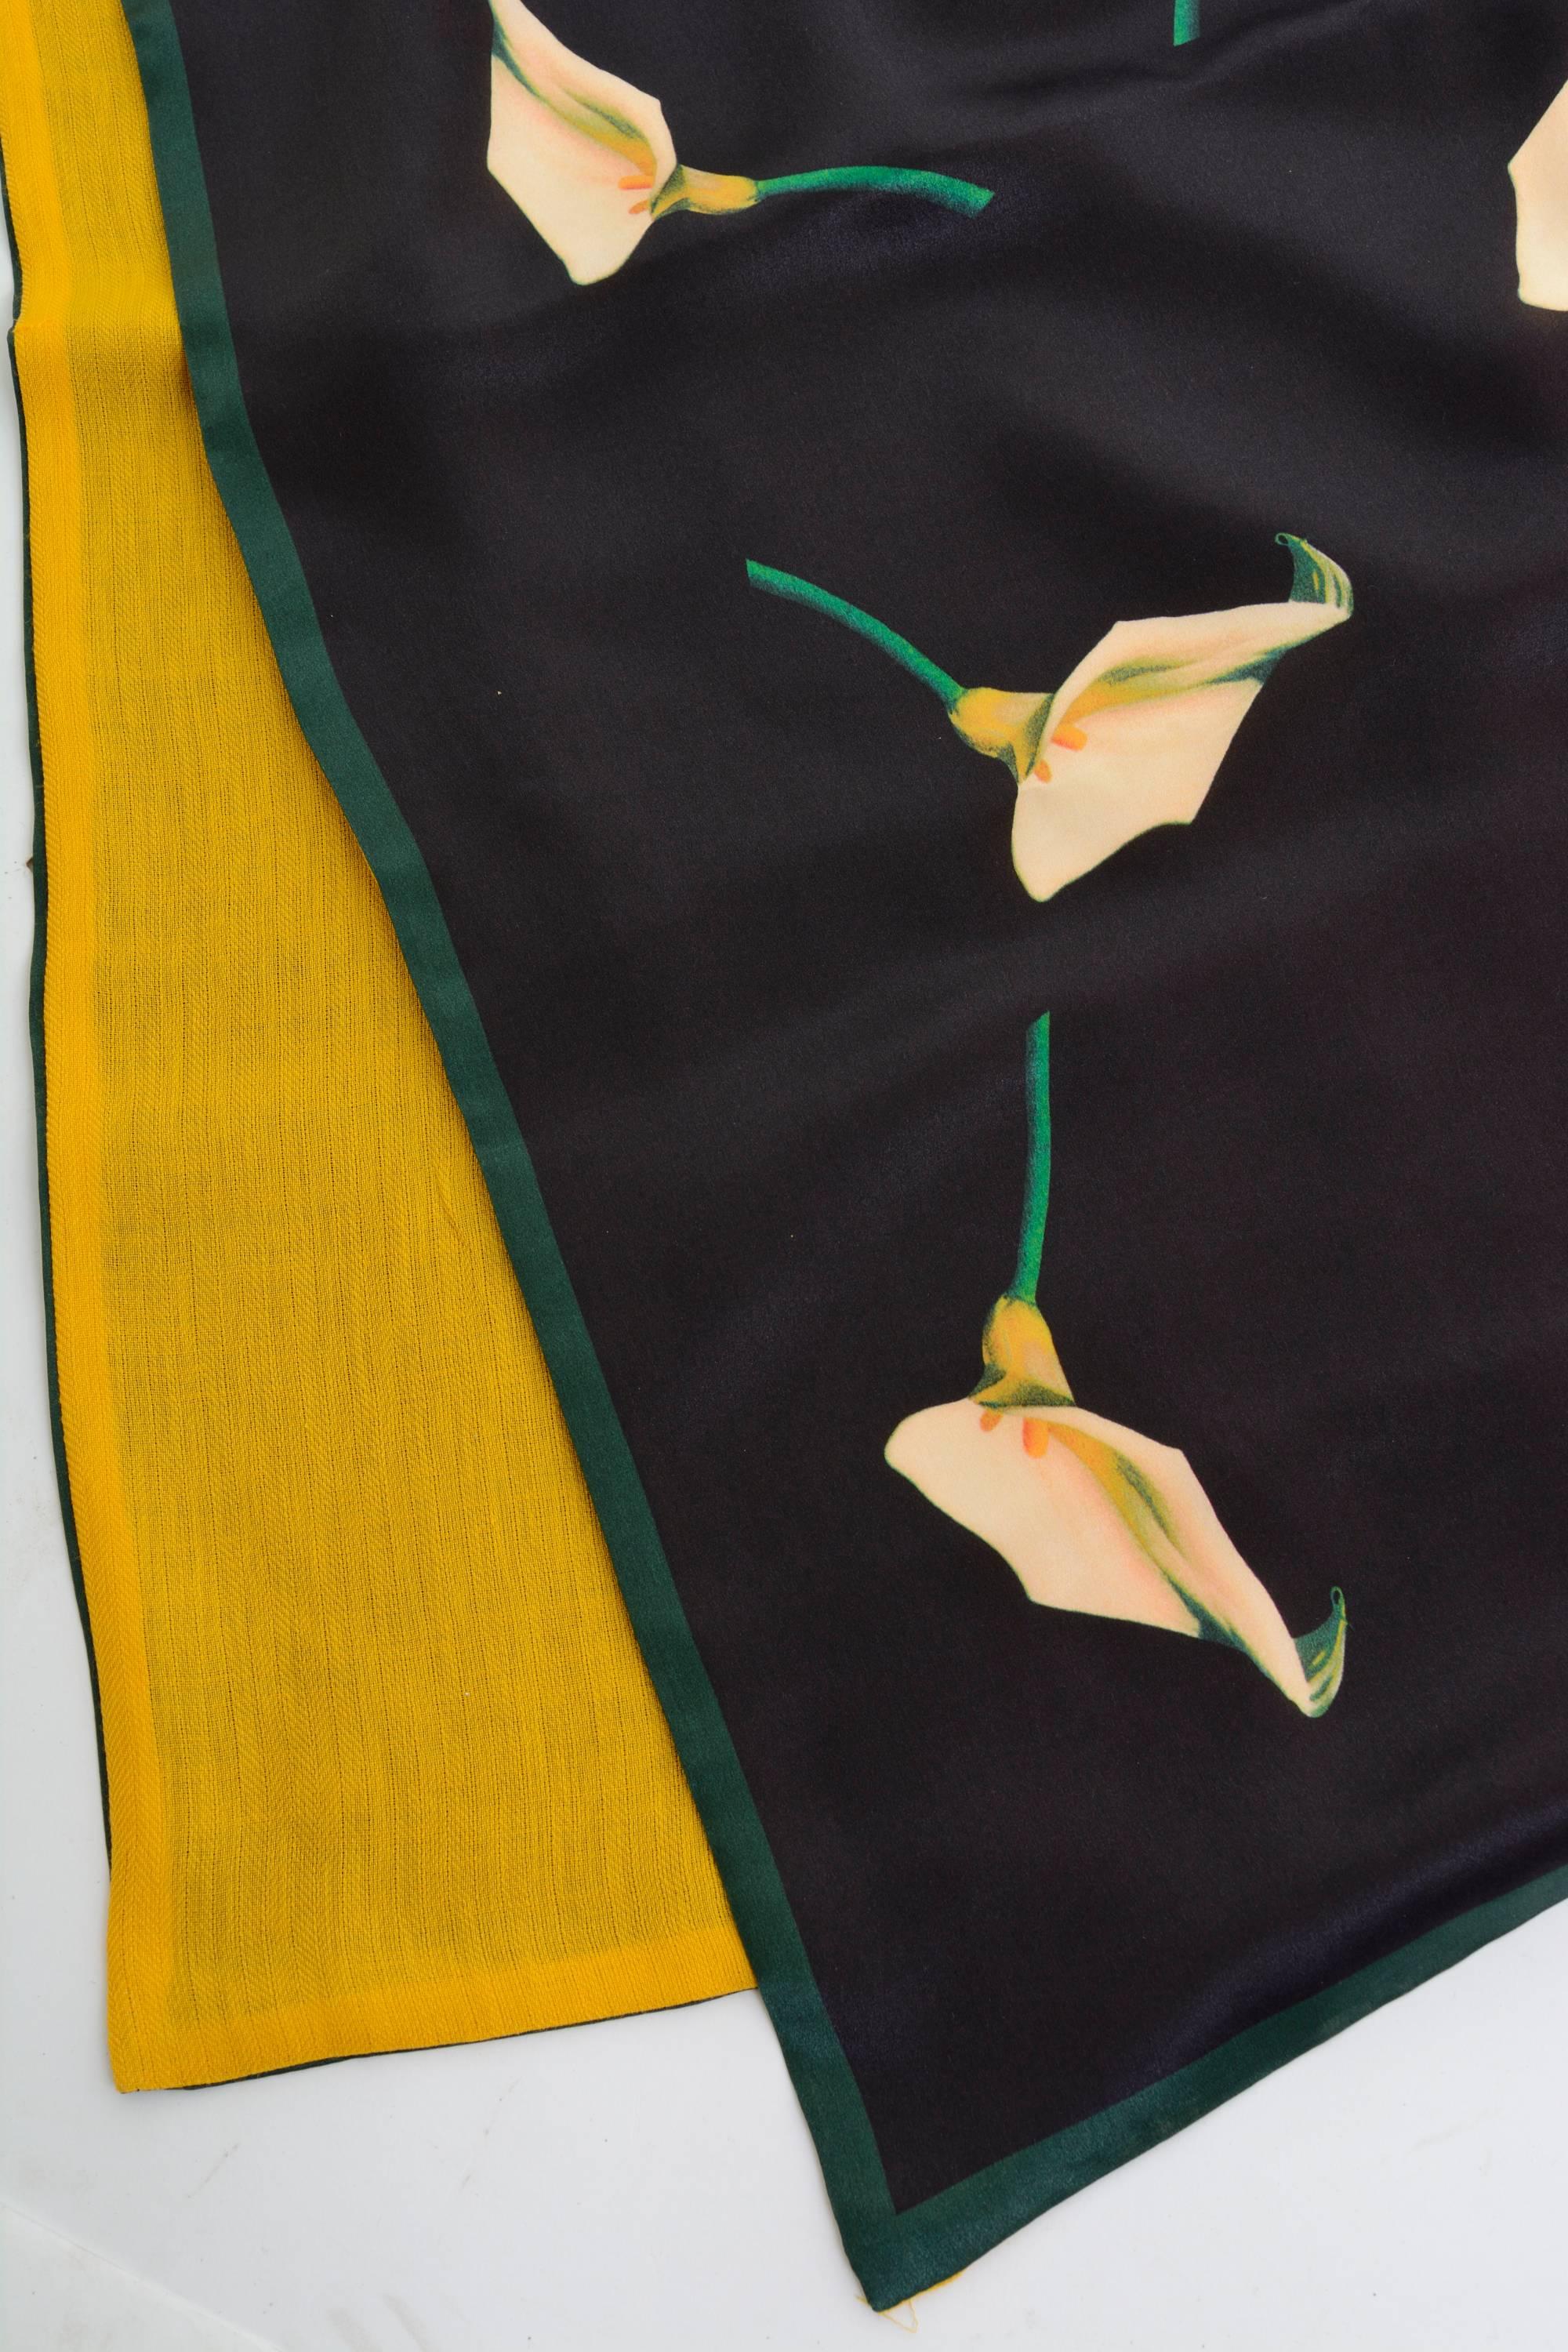 Yves Saint Laurent stole in a black silk fabric with calla lilies textile and in yellow wool fabric on the other side, never worn with tag. Made in Italy

Condition Never Worn

Label: Yves Saint Laurent
Fabric: silk/ fabric
Colour: black, yellow,